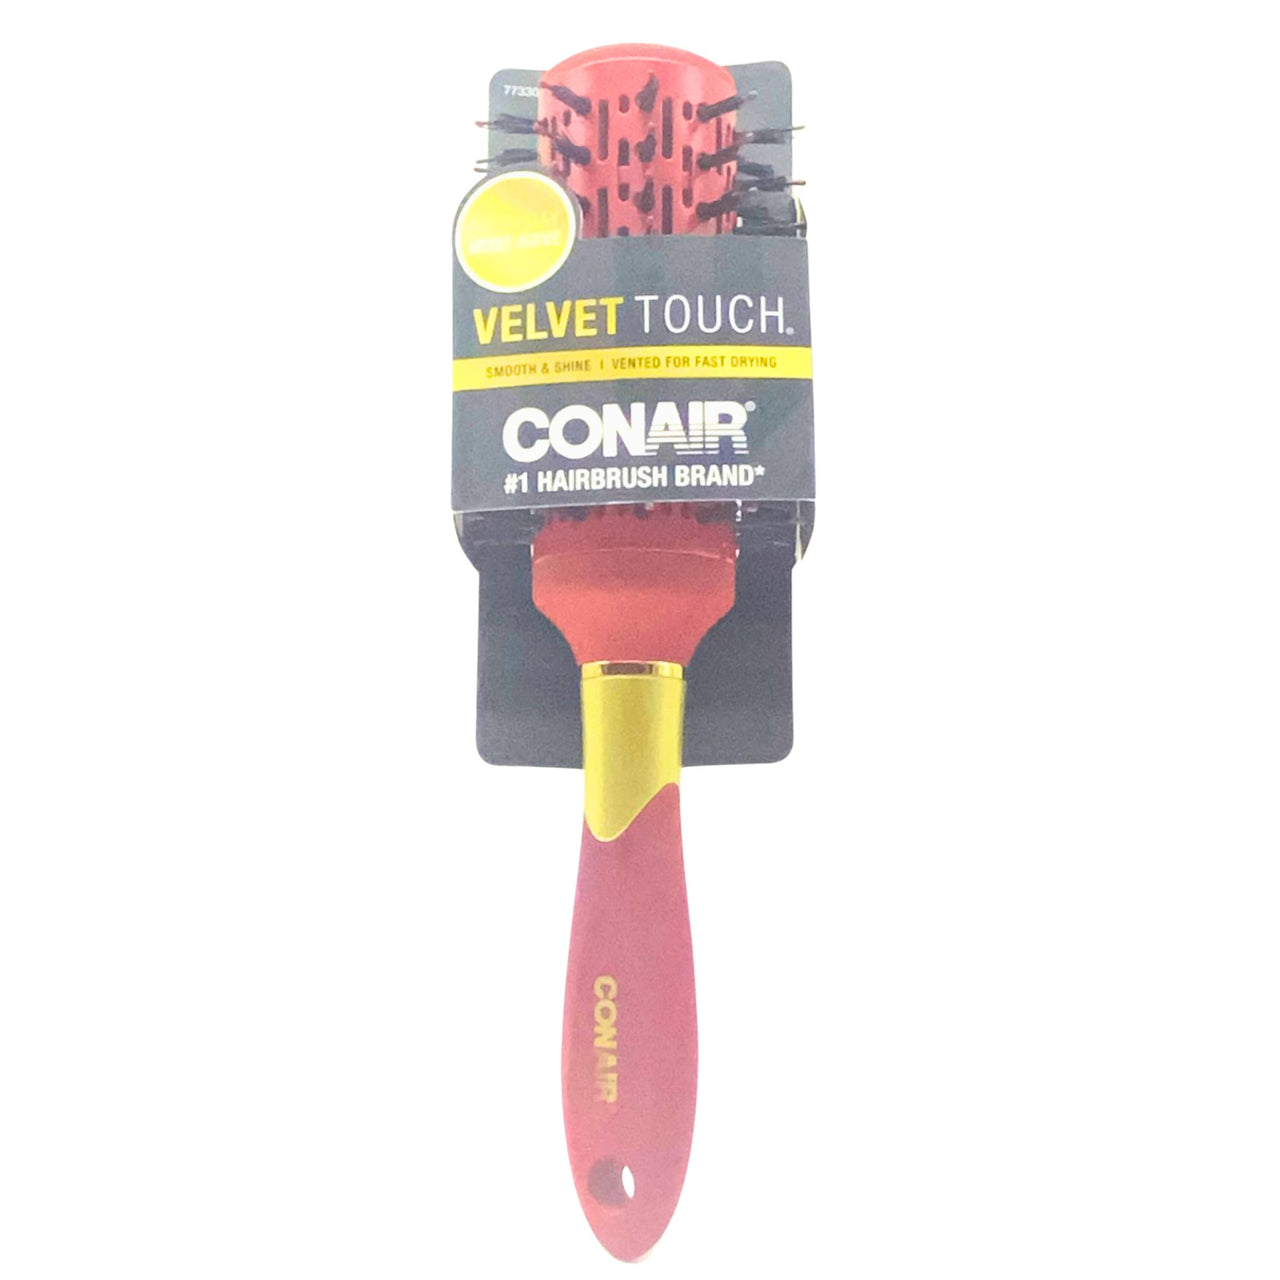 Conair Velvet Touch Smooth & Shine Vented For Fast Drying